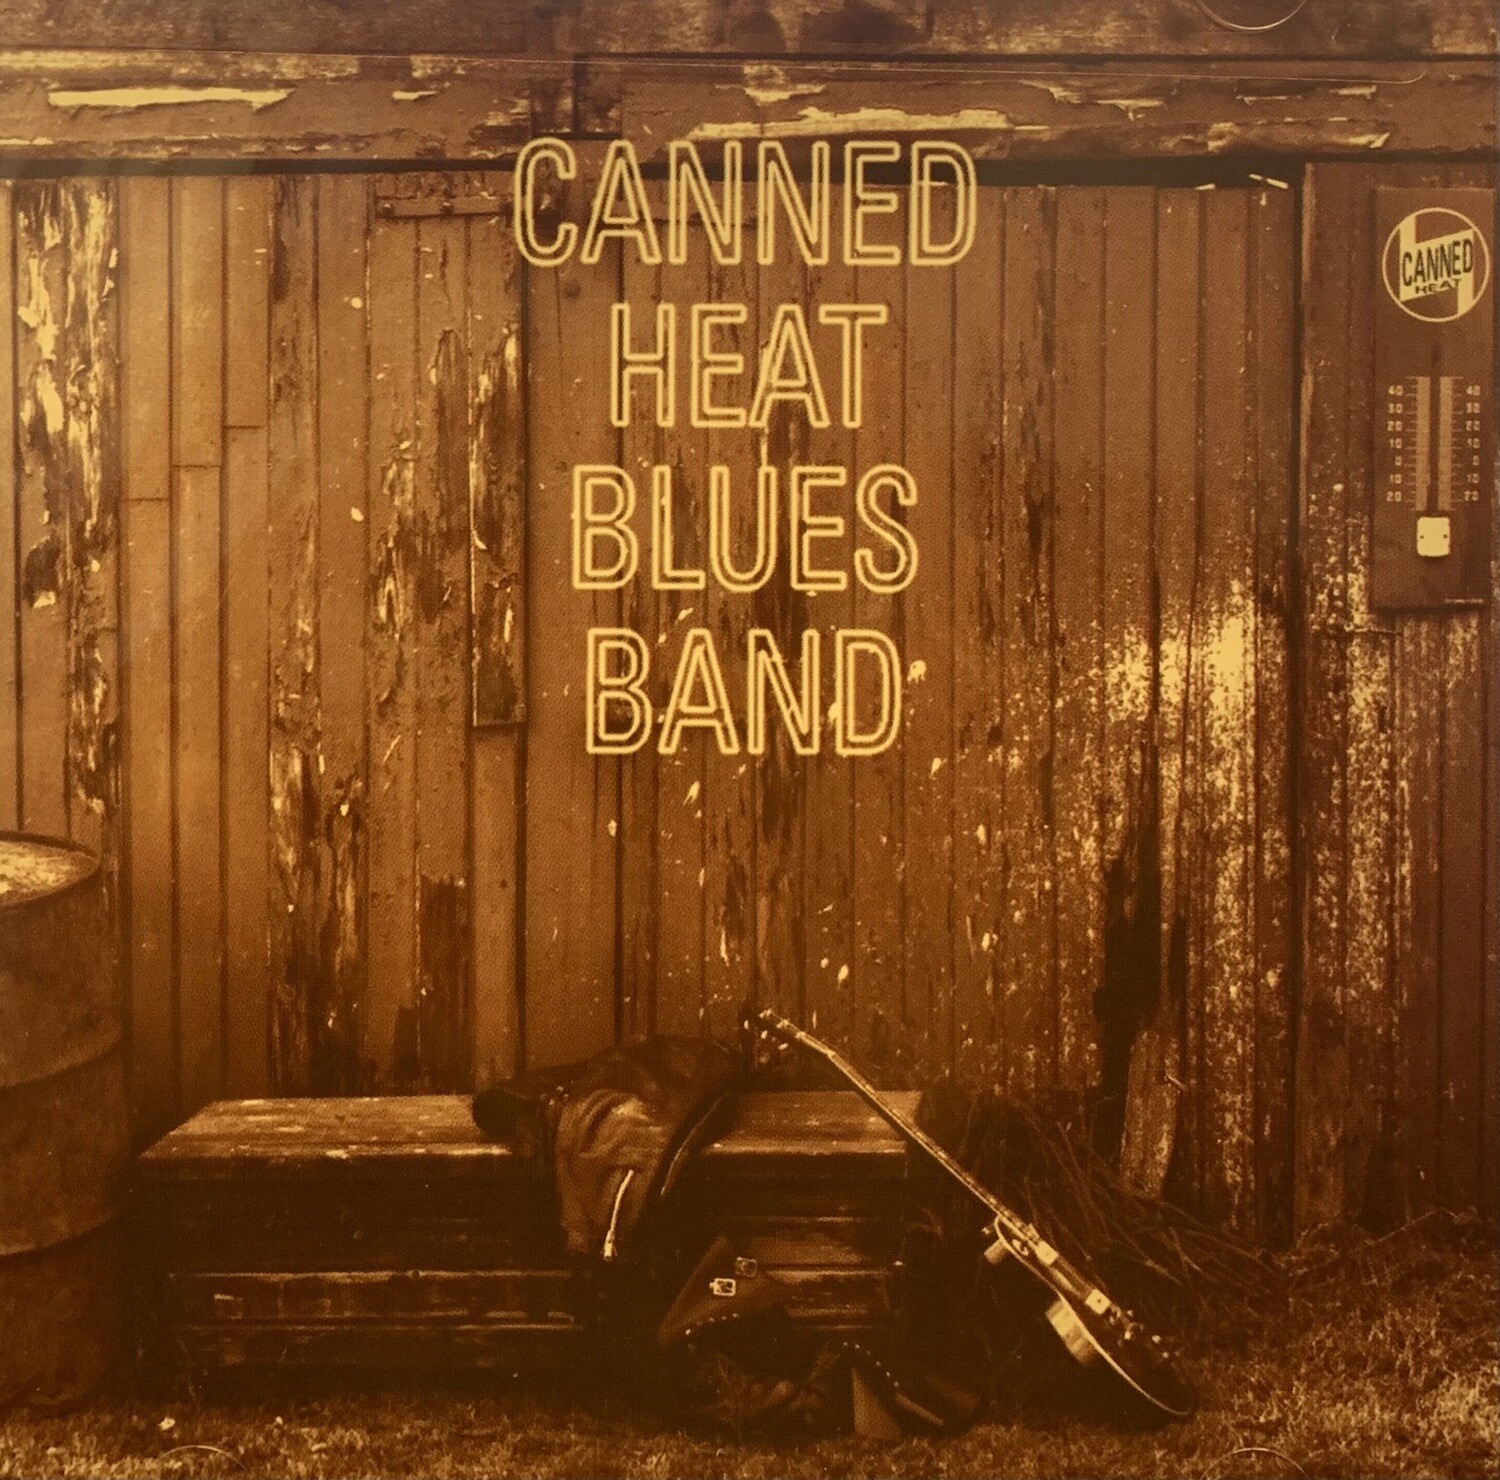 Canned Heat Blues Band CD